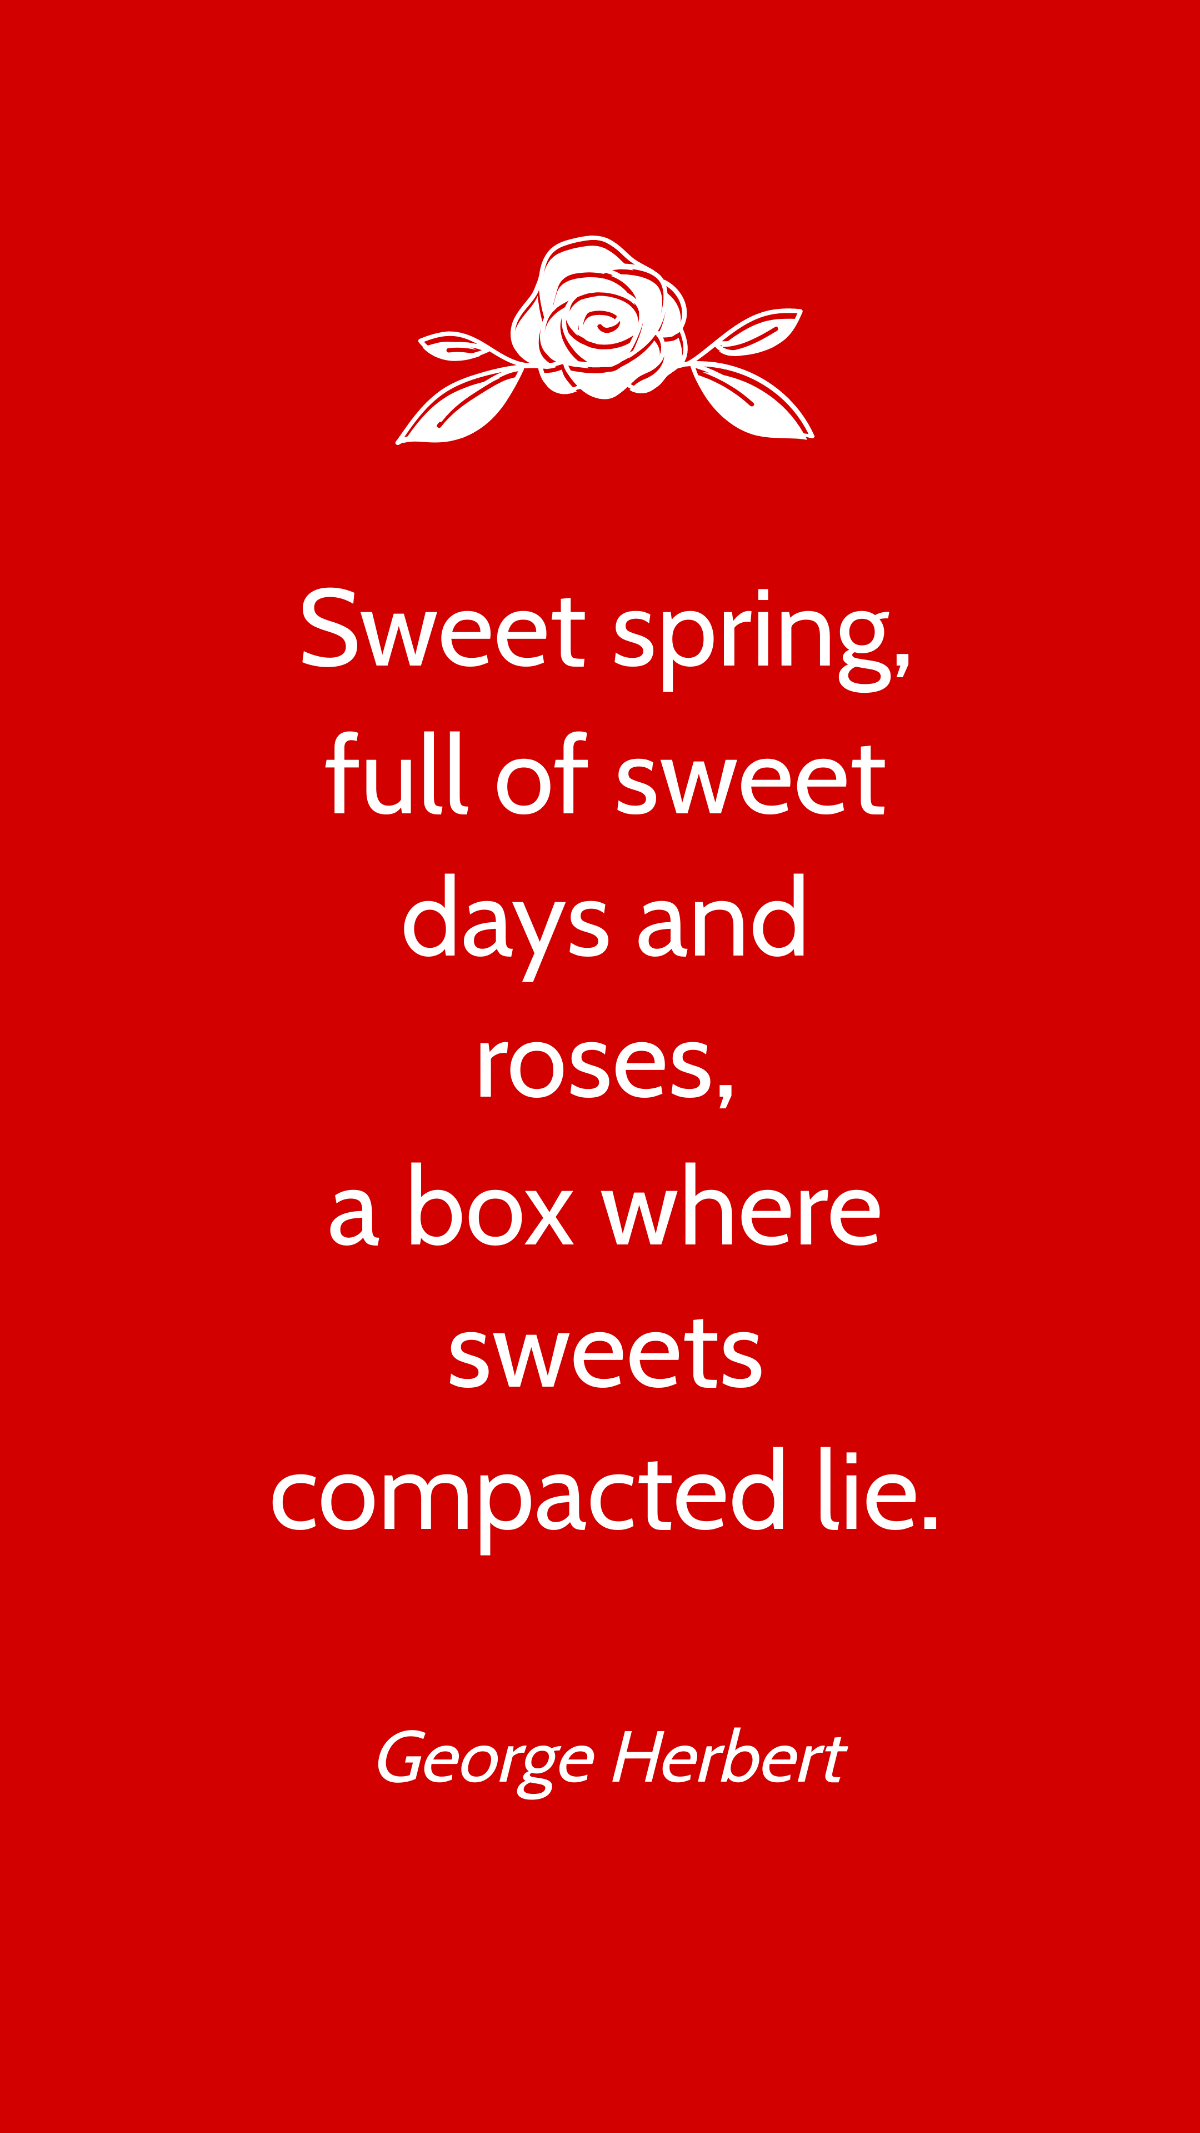 George Herbert - Sweet spring, full of sweet days and roses, a box where sweets compacted lie. Template